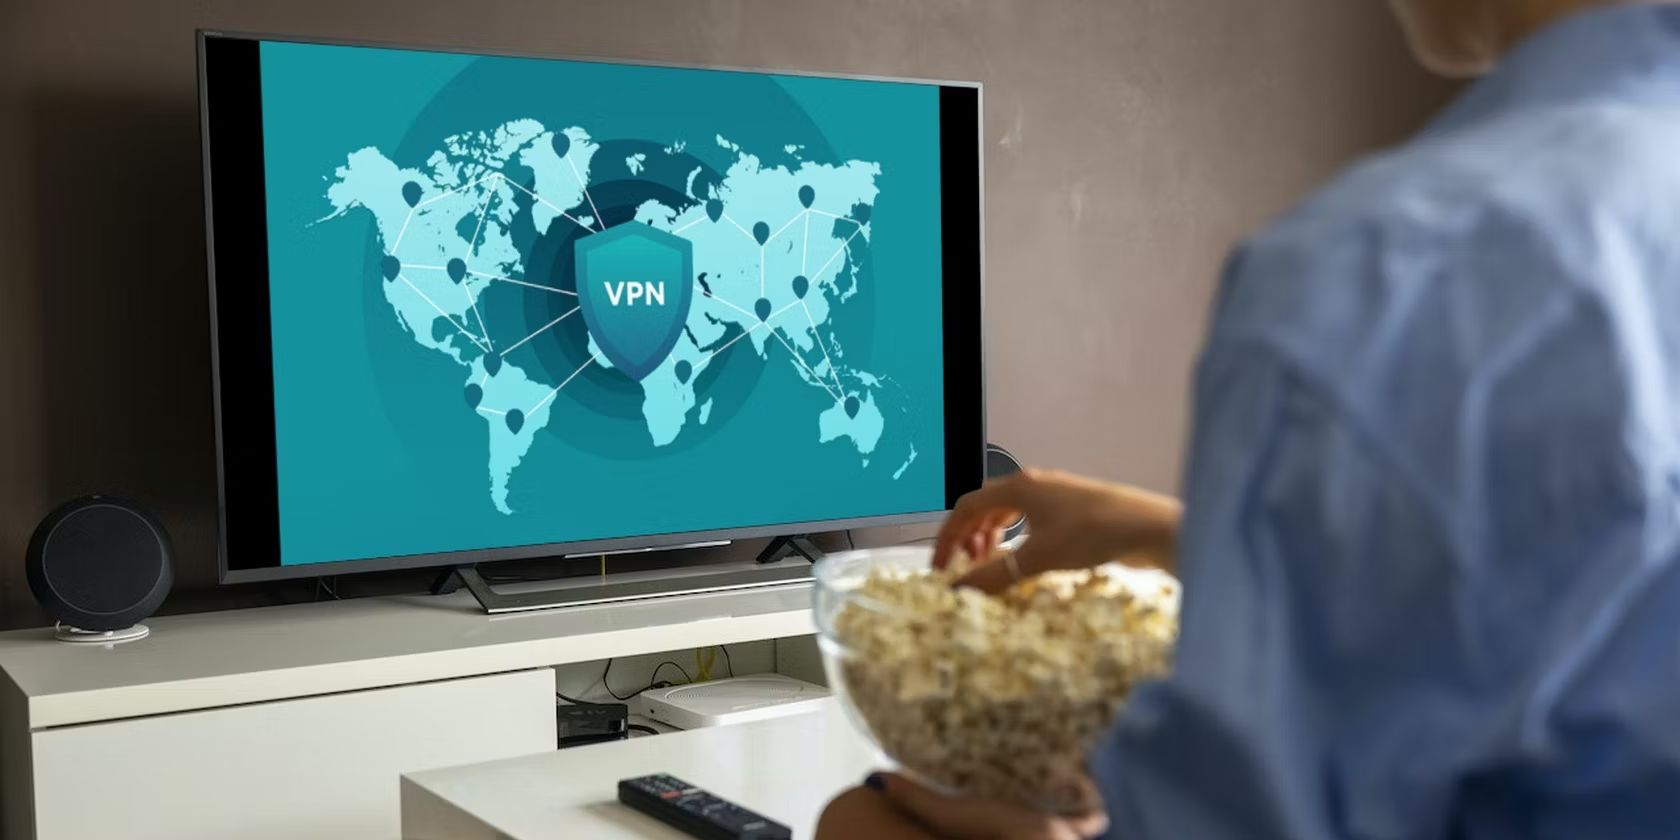 How To Use VPN On Smart TV